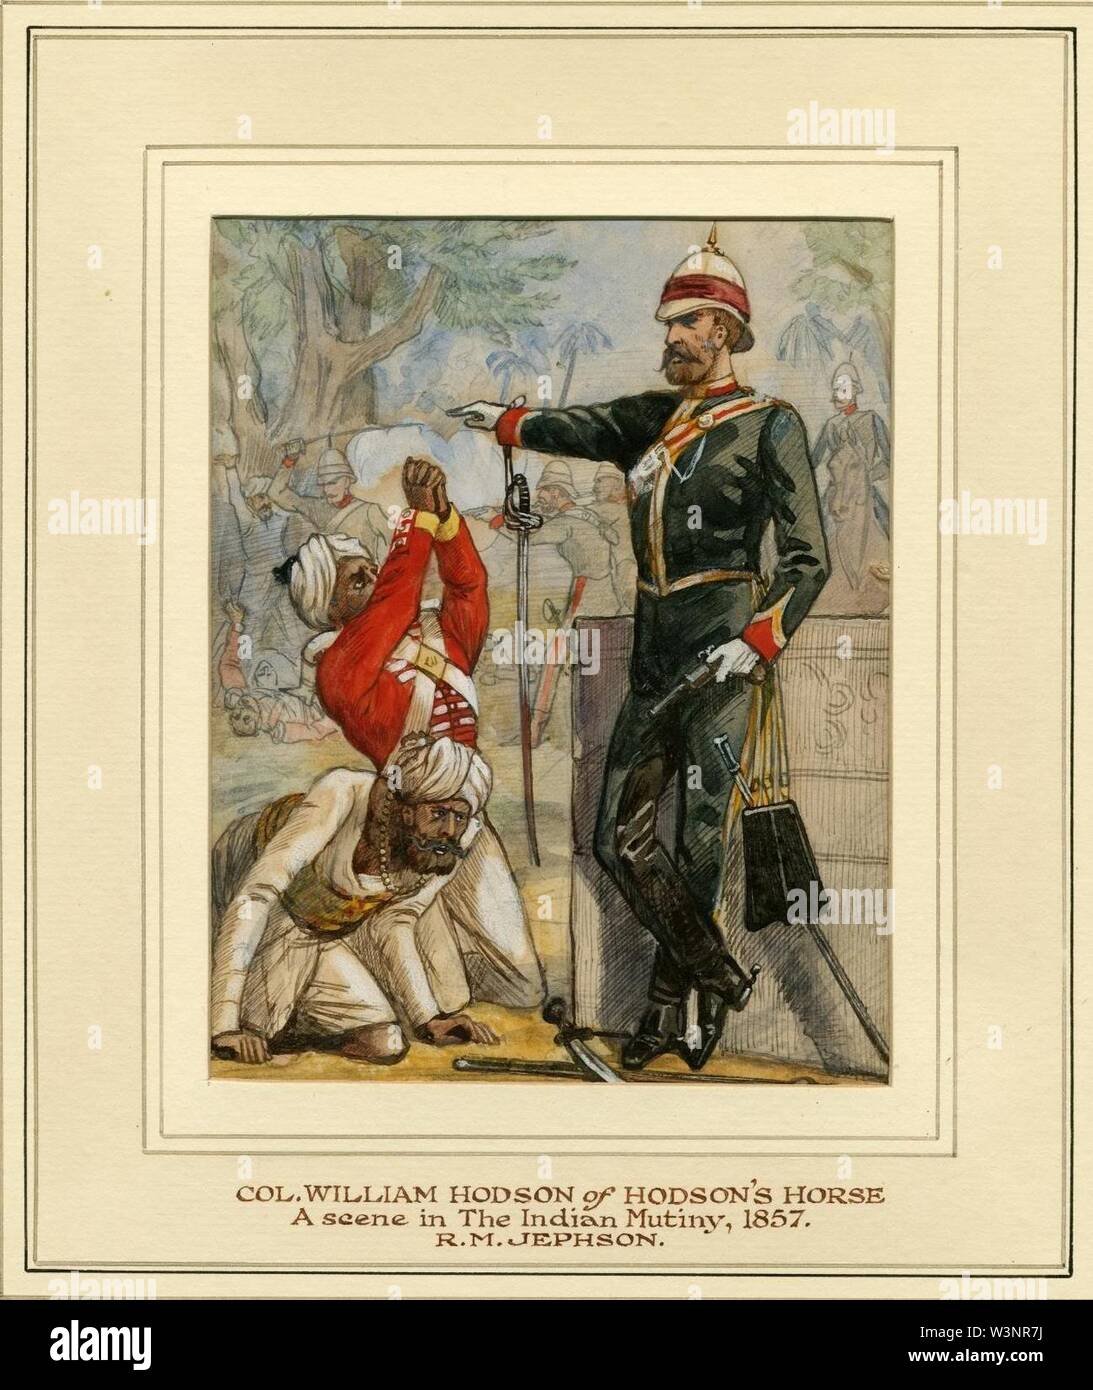 COL.WILLIAM HODSON of HODSON'S HORSE A scene in The Indian Mutiny, 1857. Stock Photo